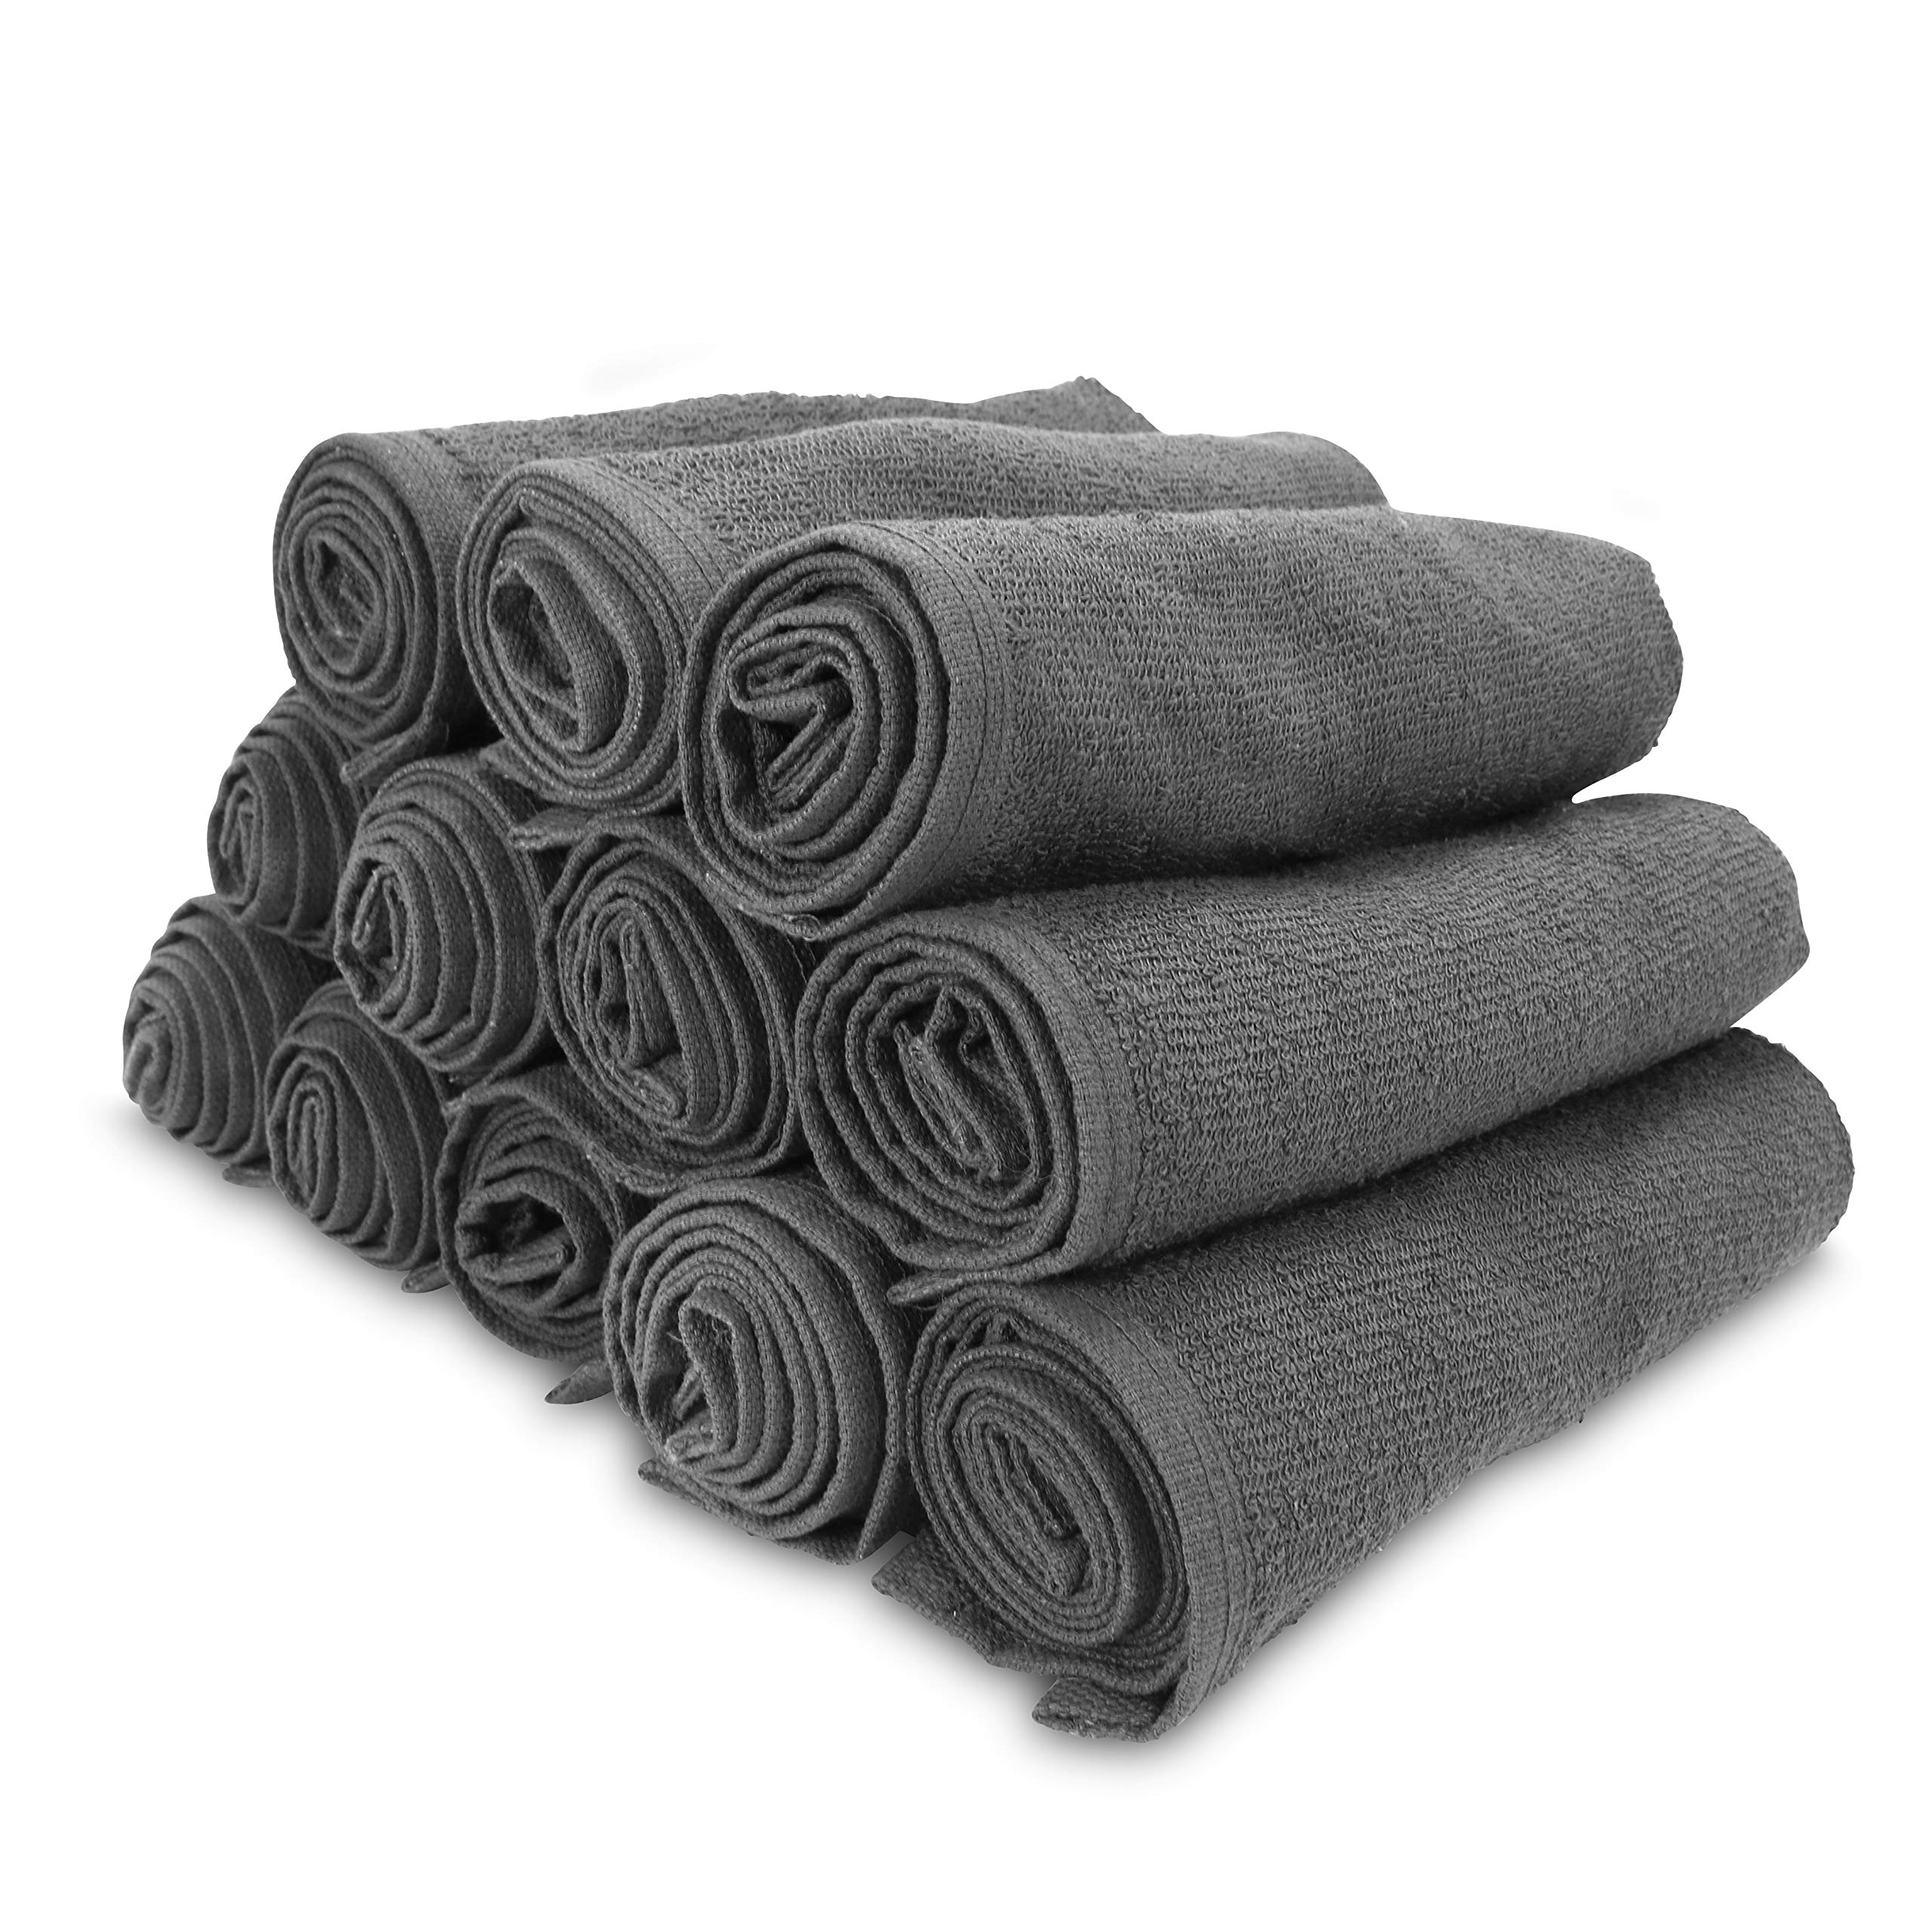 Arkwright Bleach Safe Salon Towel - (Pack of 12) 100% Ring Spun Cotton  Super Soft, Lightweight, Quick Dry, Absorbent Hand Towels, Perfect for Spa,  Facials, Gym, Cosmetology, 16 x 28 in, Charcoal Charcoal 16 x 28 Inch (12  Pack)